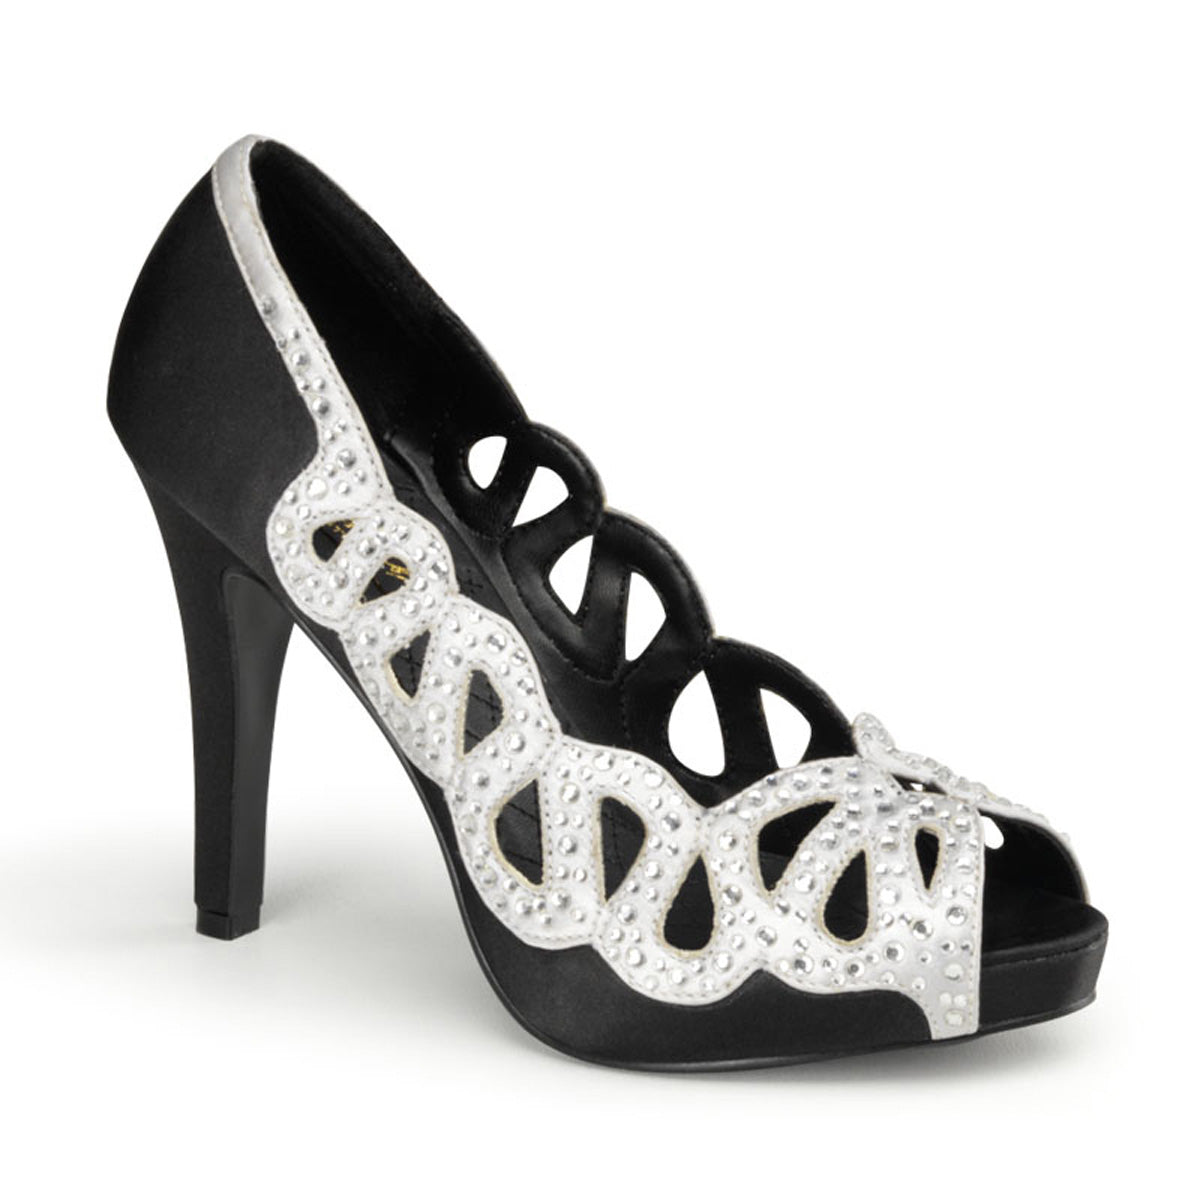 AVA-12 Sexy Retro Glamour 4.5" Heel Black & Silver Platforms-Pin Up Couture- Sexy Shoes